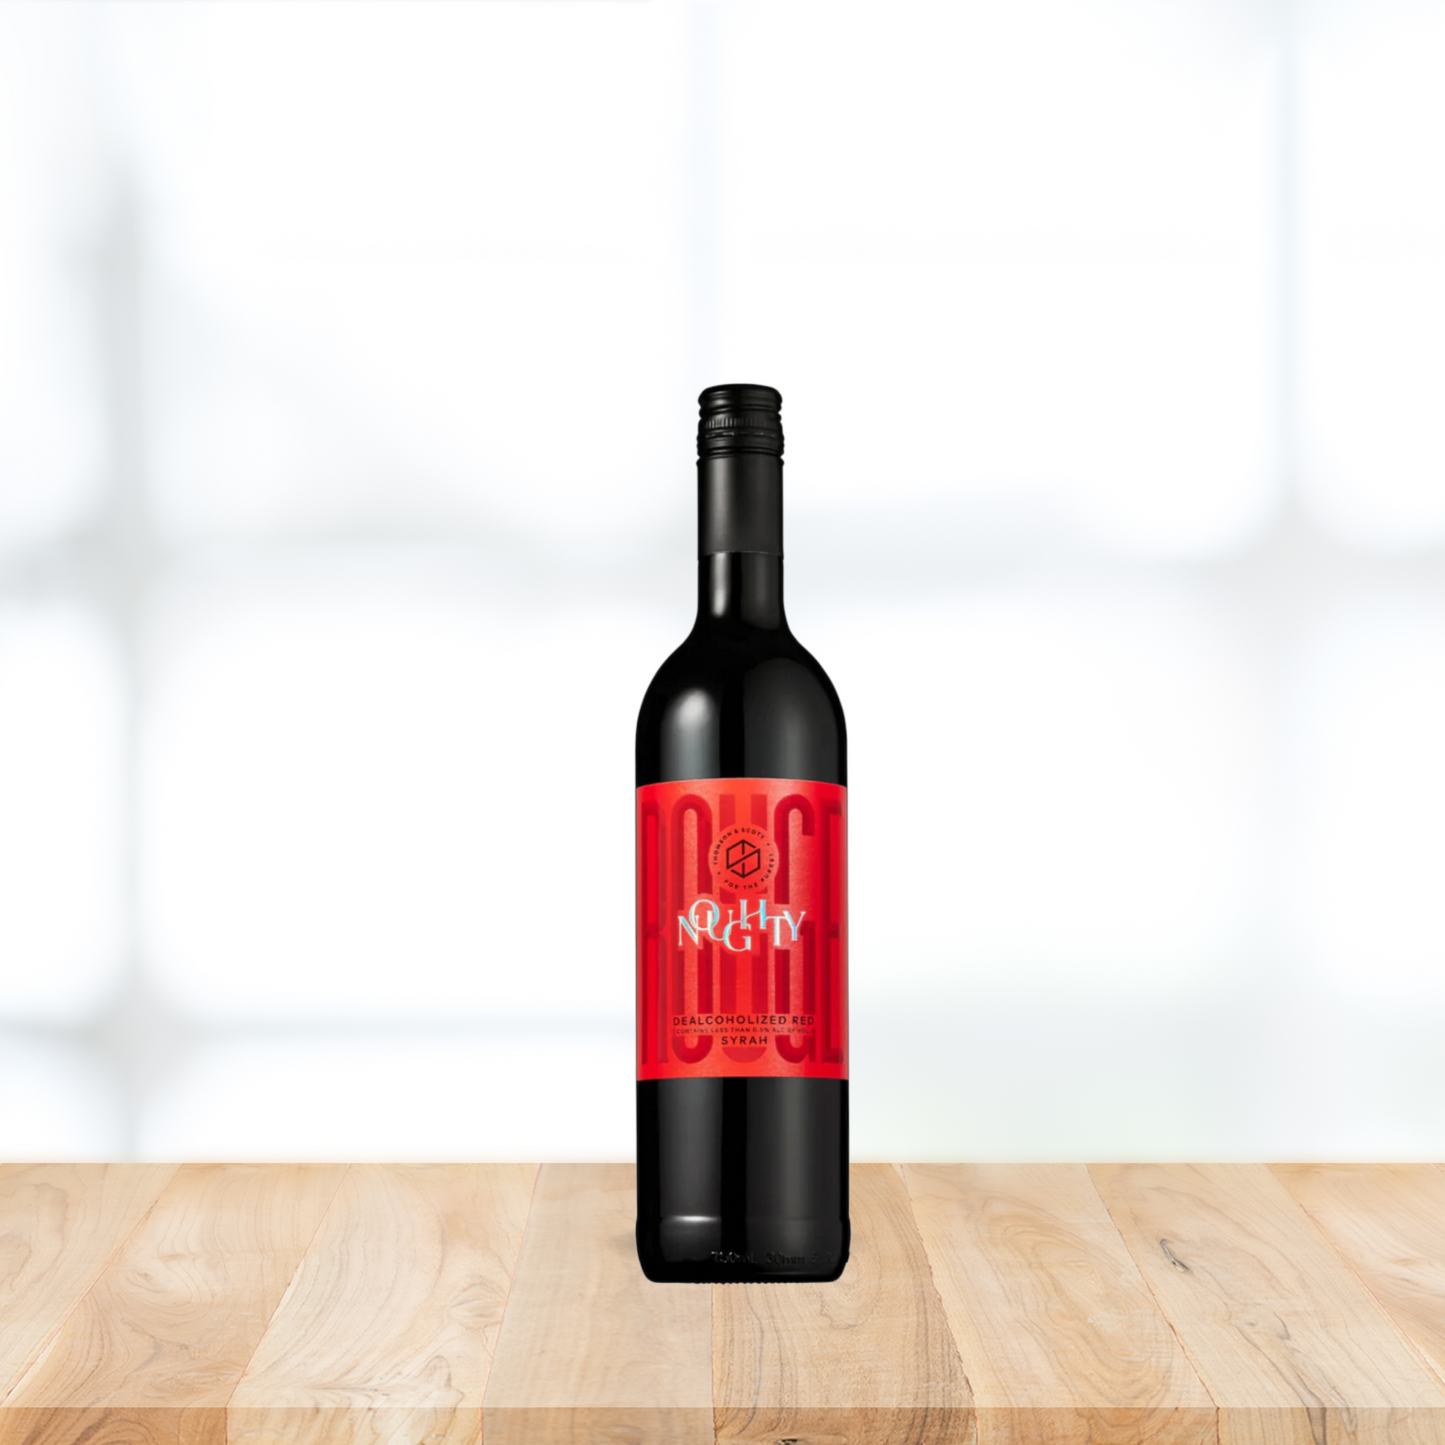 Noughty dealcoholized syrah against white background on wooden platform